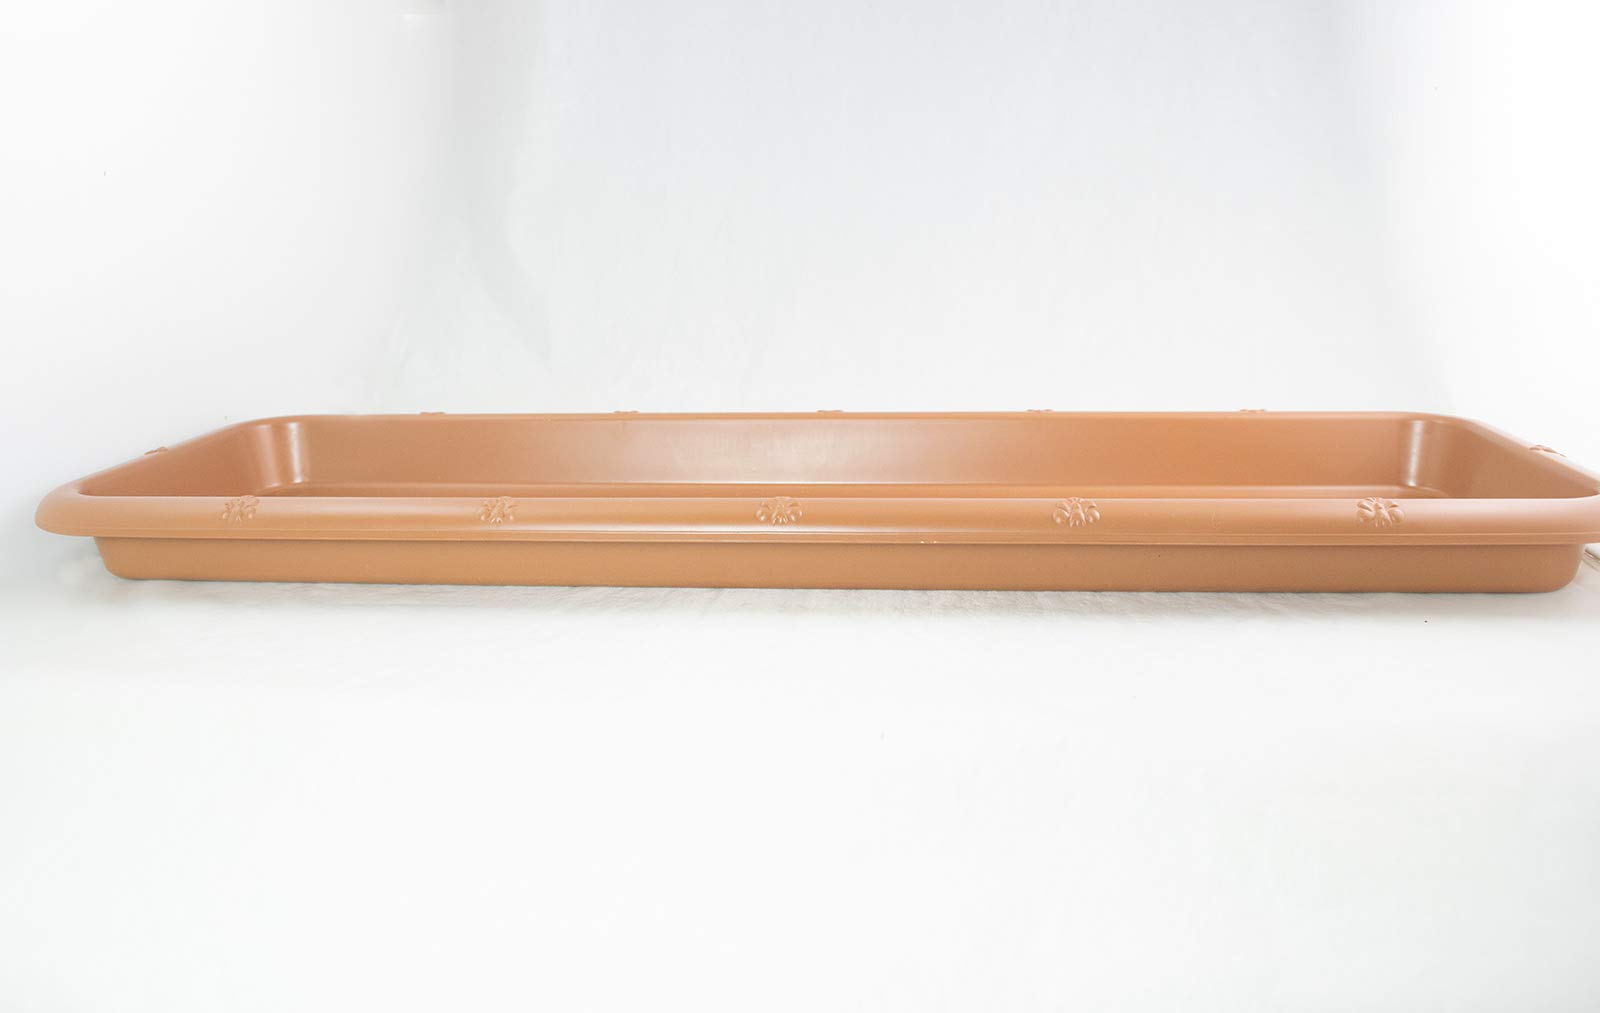 Large Japanese Plastic Humidity Tray for Bonsai Tree & Indoor Plants - 24"x 8"x 1.5"